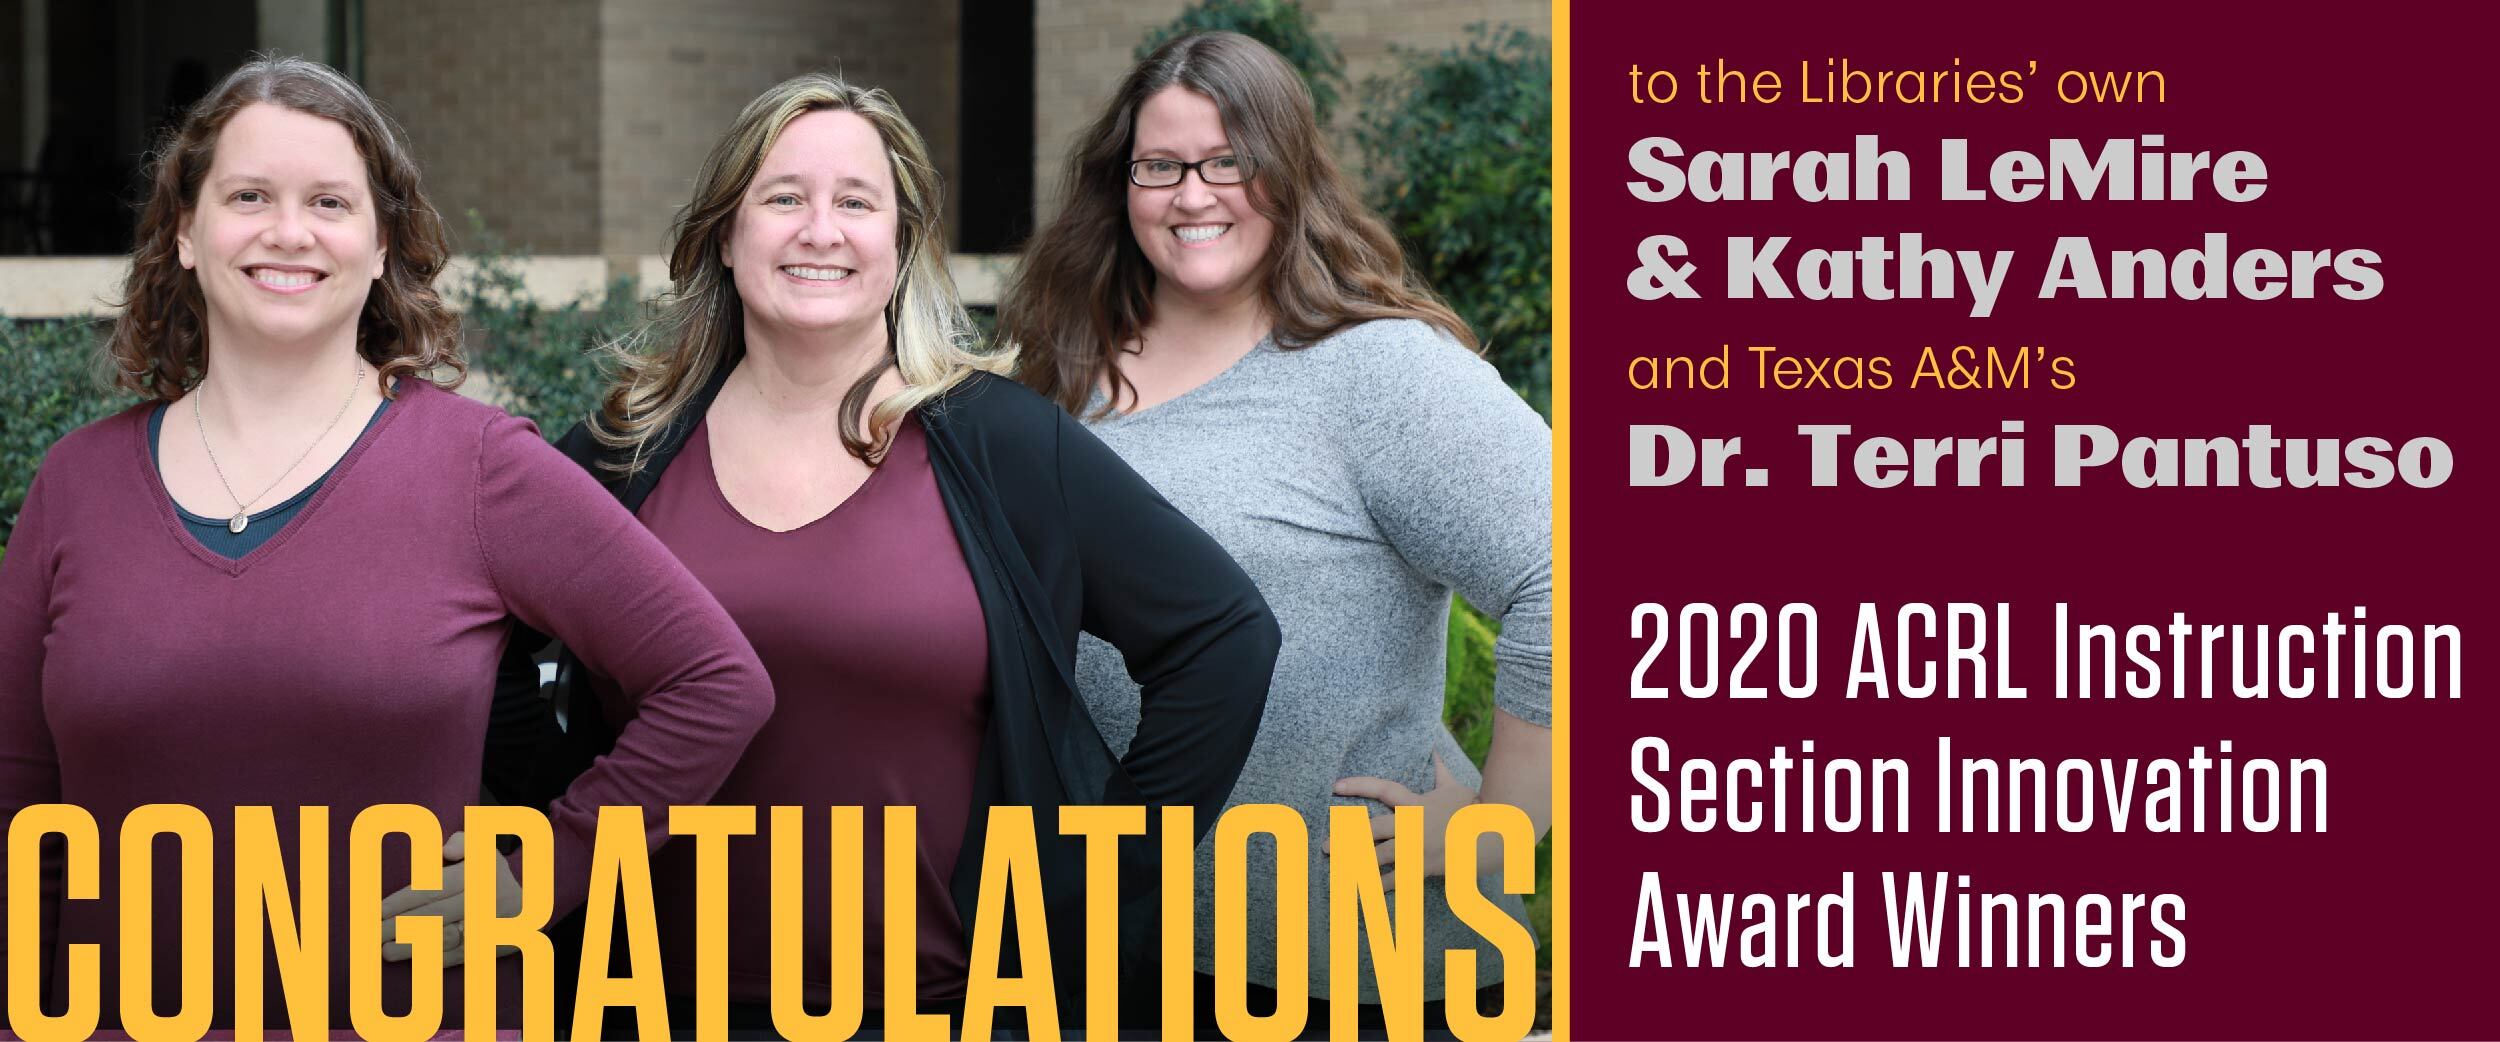 Congratulations to the Libraries' own Sarah LeMire and Kathy Anders, and Texas A&M's Dr. Terri Pantuso, as 2020 ACRL Instruction Section Innovation Award Winners.